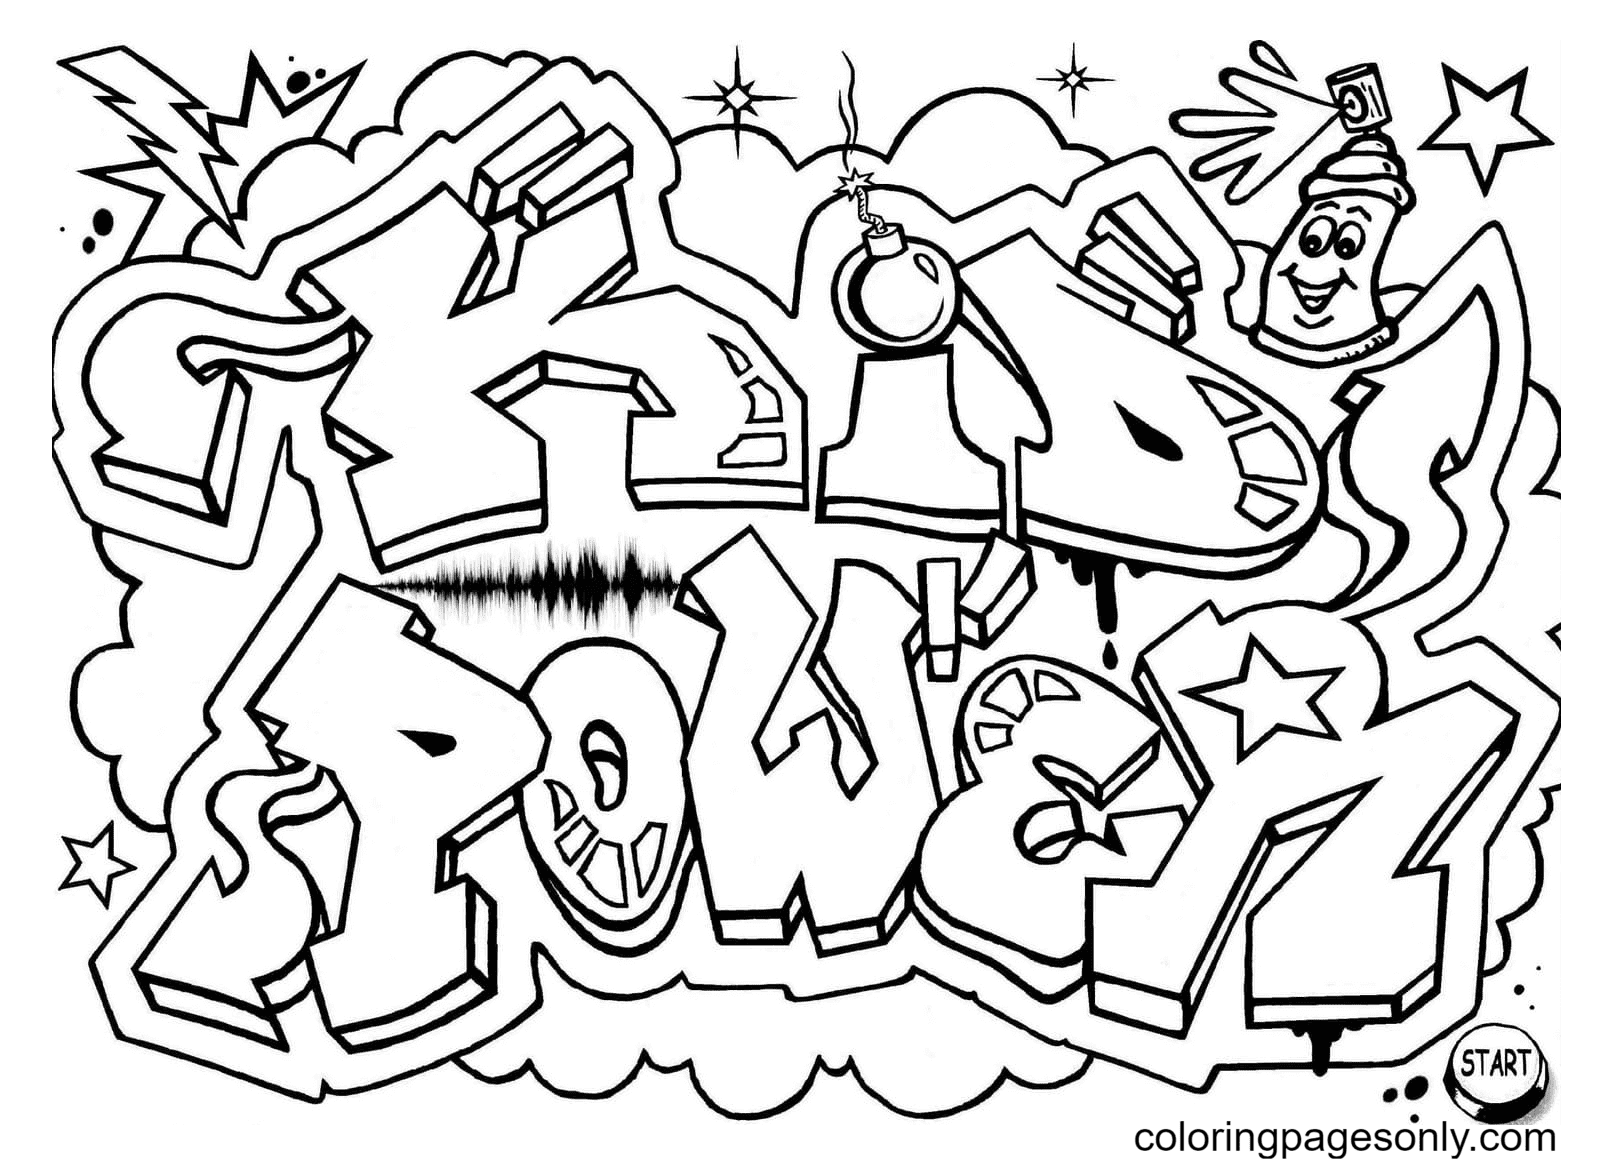 Kid power Coloring Pages   Graffiti Coloring Pages   Coloring ...